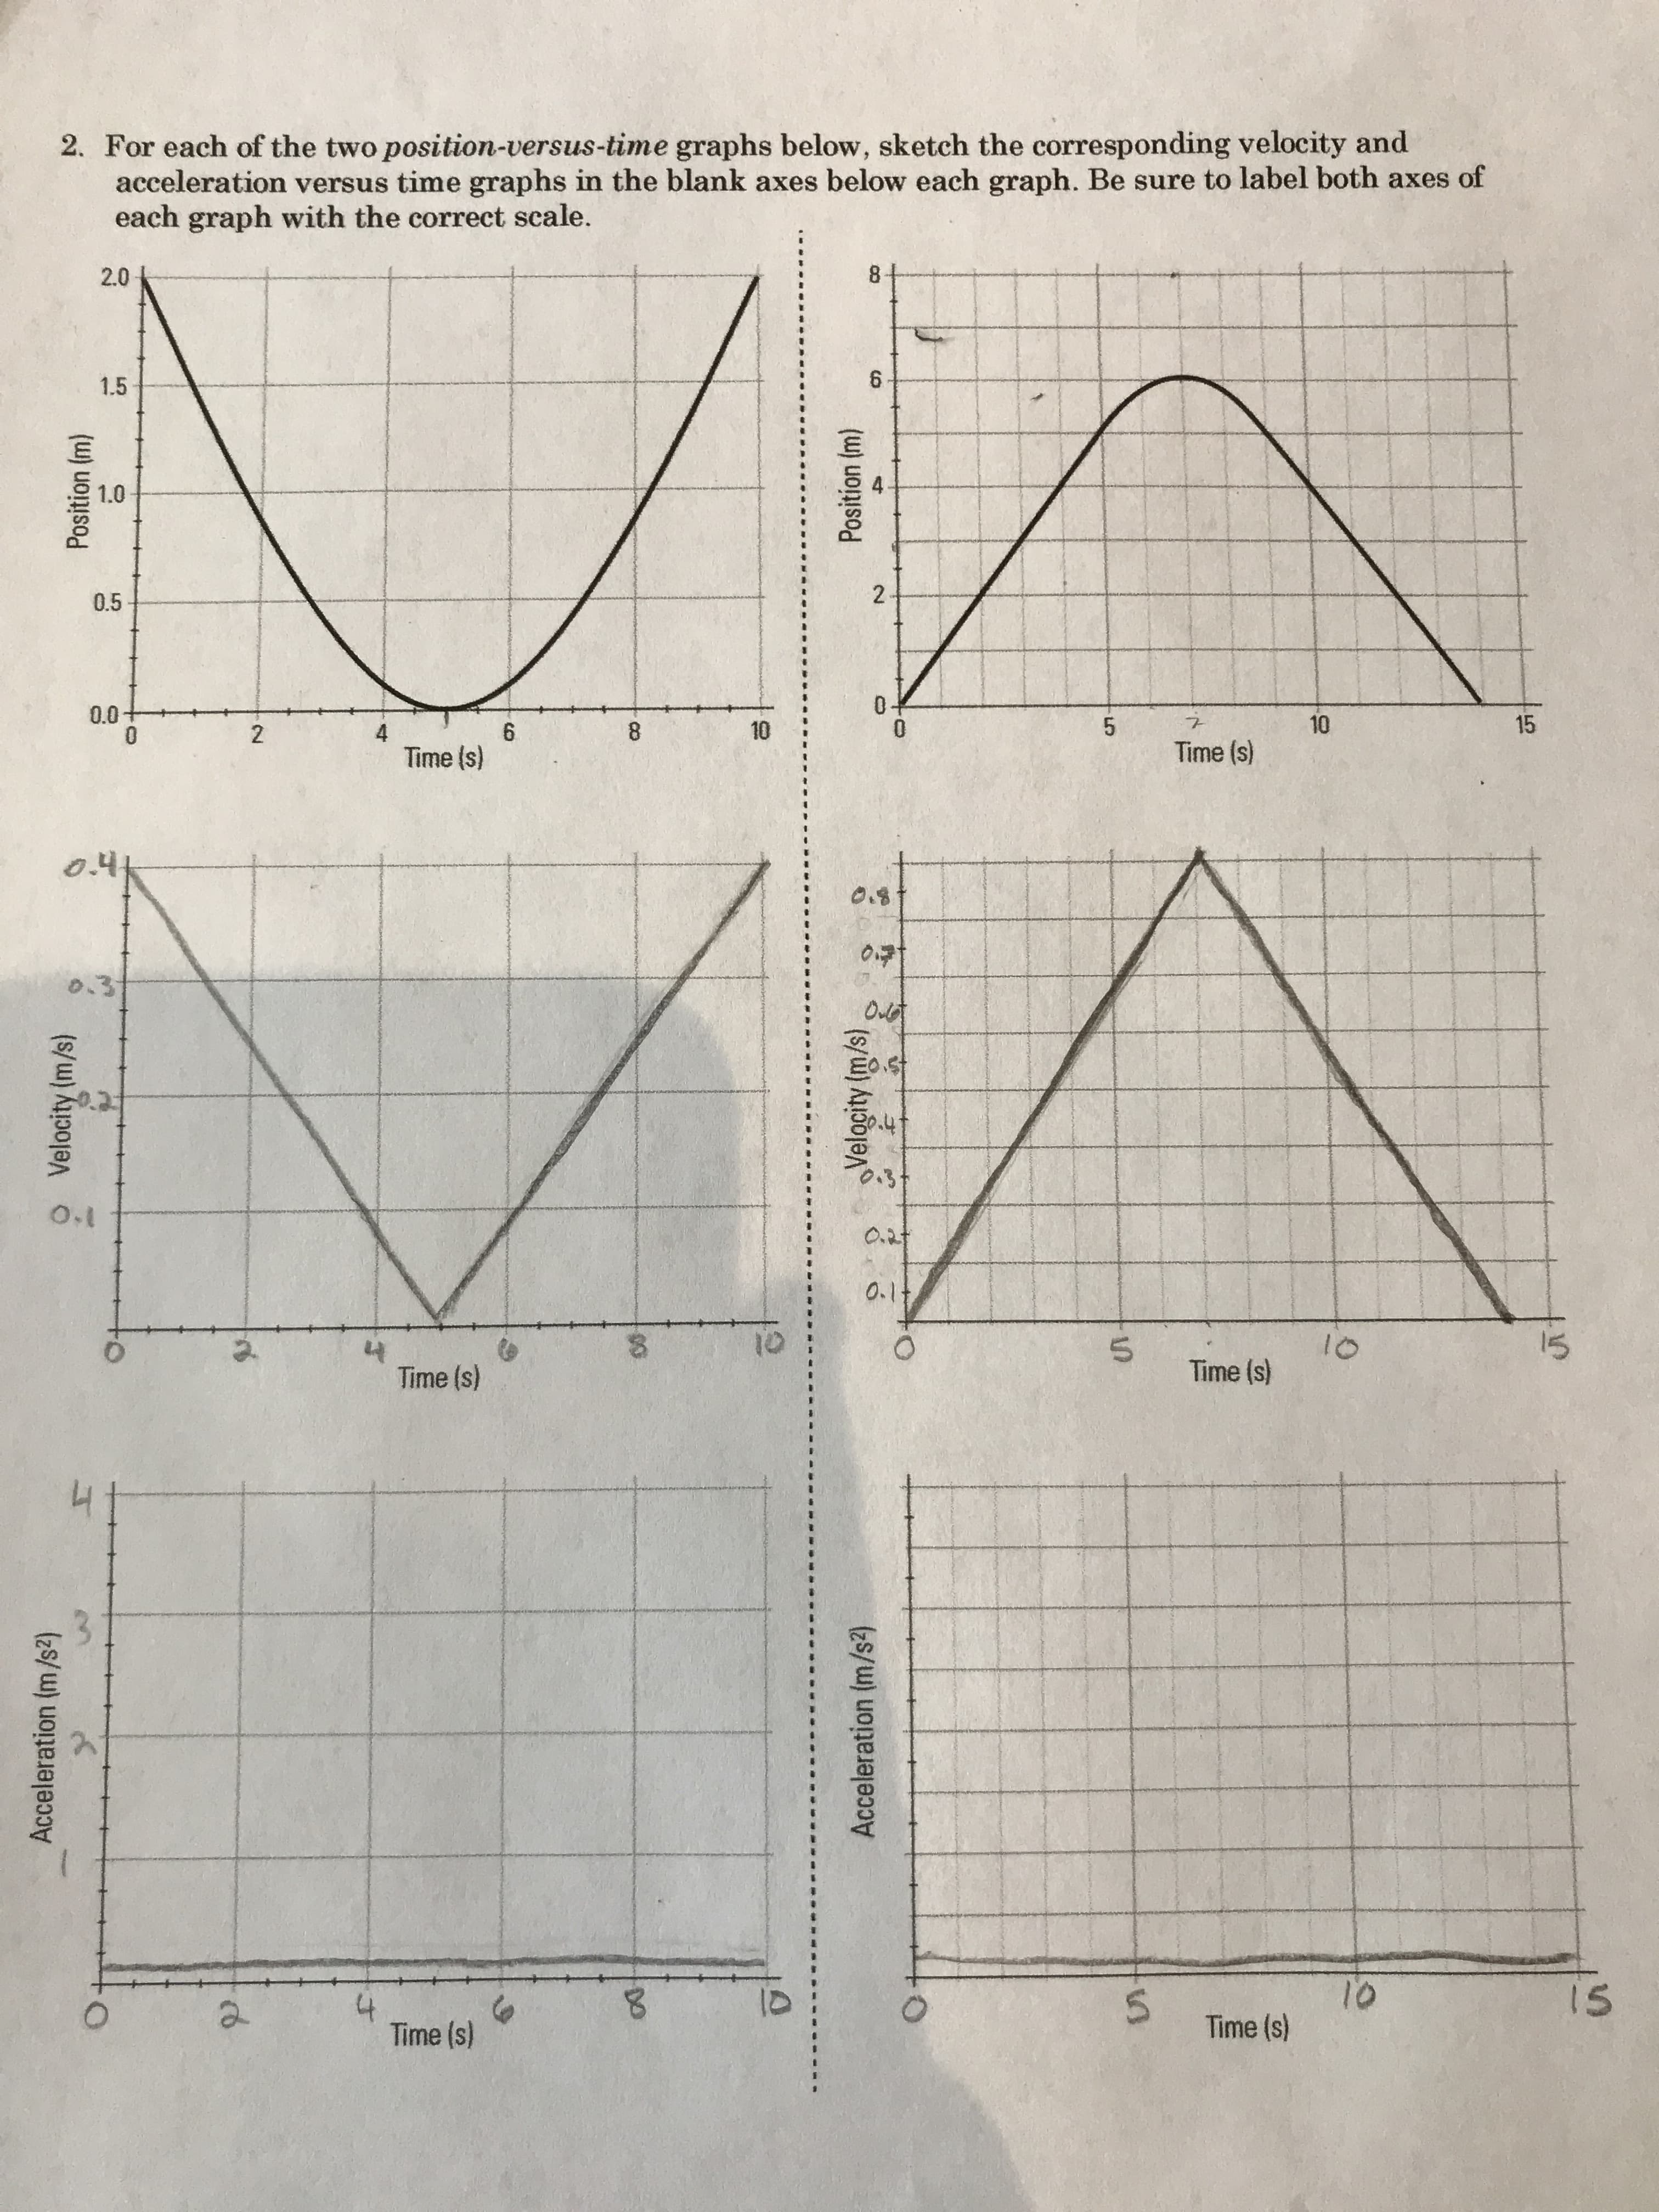 2. For each of the two position-versus-time graphs below, sketch the corresponding velocity and
acceleration versus time graphs in the blank axes below each graph. Be sure to label both axes of
each graph with the correct scale.
8
2.0
6
1.5
1.0
2
0.5
O
0.0
0
15
5
10
8
6
4
2
Time (s)
Time (s)
0.4
0.7
Ouet
St
O.1
0.1
15
8
5
O
Time (s)
Time (s)
10
Time (s)
15
4
Time (s)
Position (m)
o Velocity (m/s)
Acceleration (m/s2)
CO
Position (m)
DO
Acceleration (m/s2)
10
S
L2
